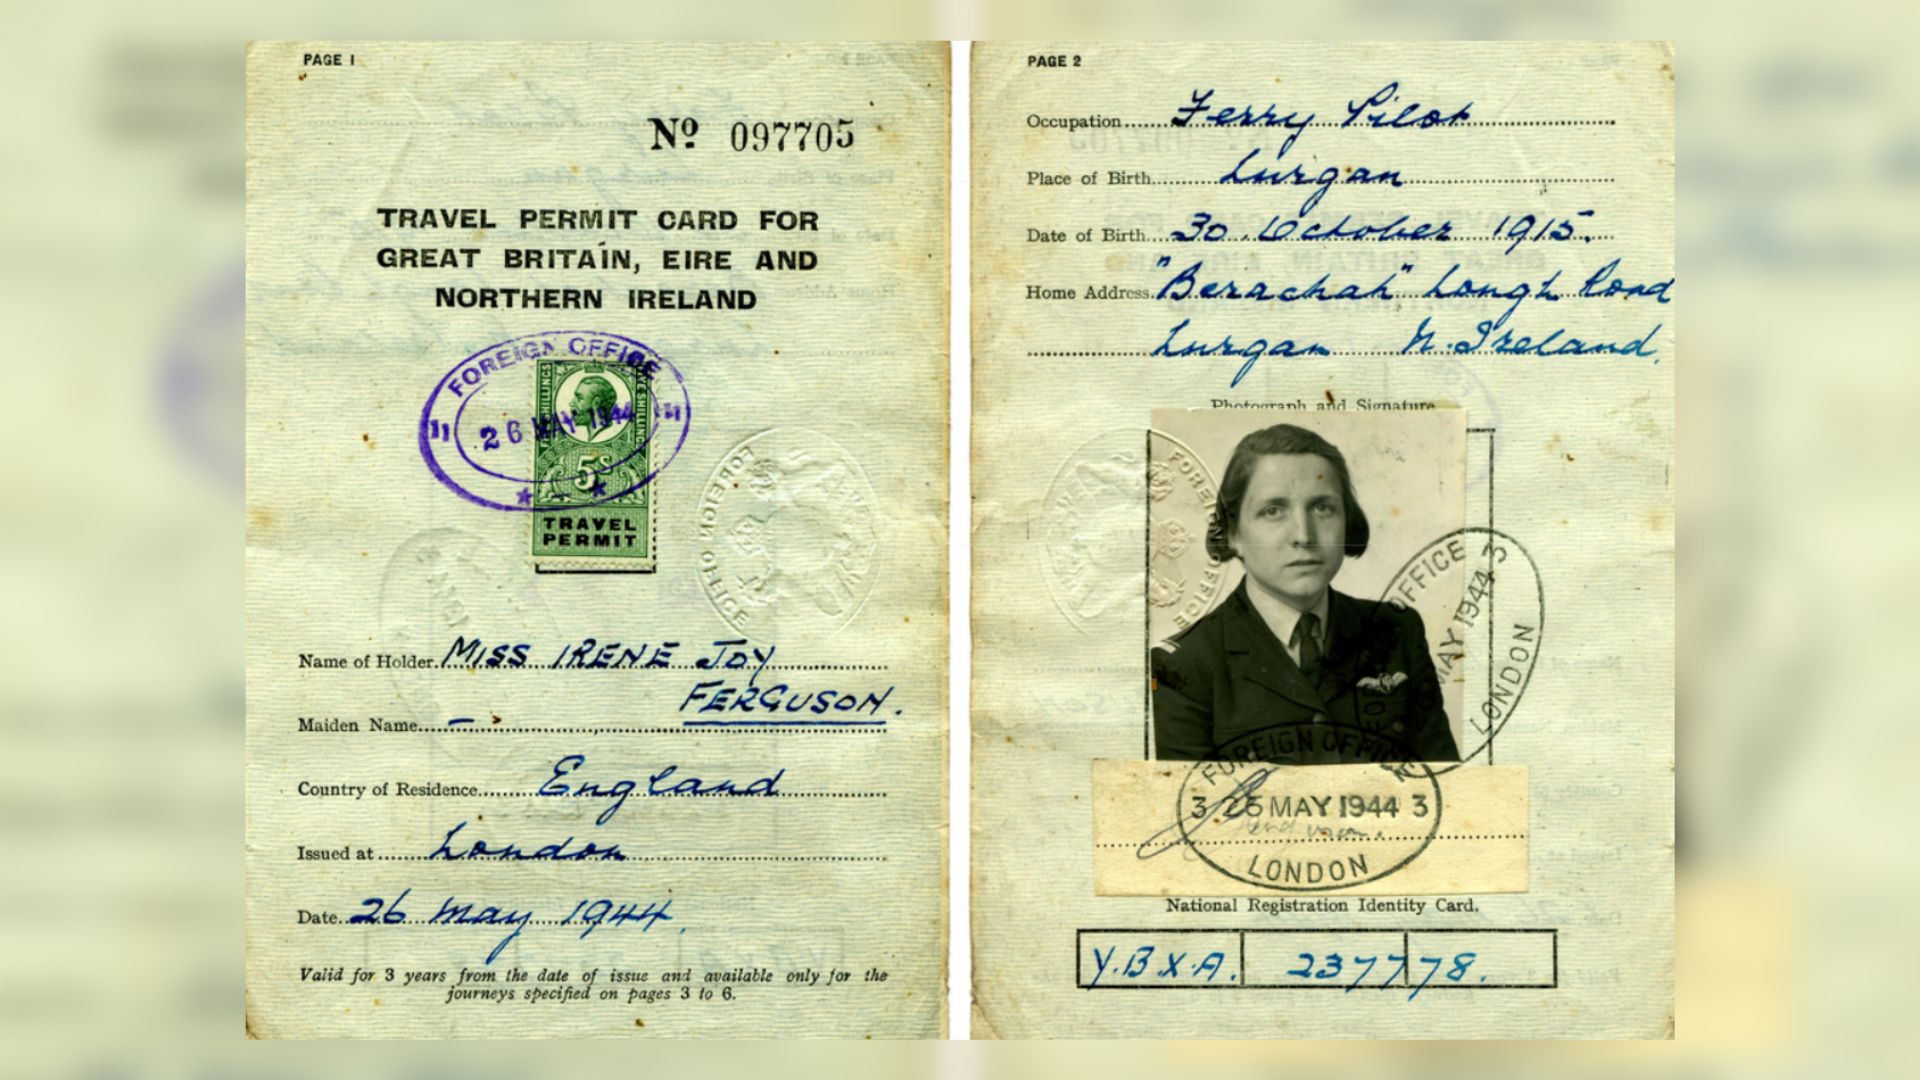 Travel permit card for Great Britain, Éire, and Northern Ireland belonging to Miss Irene Joy Ferguson, born on 30th October 1915 in Lurgan, Co. Armagh.